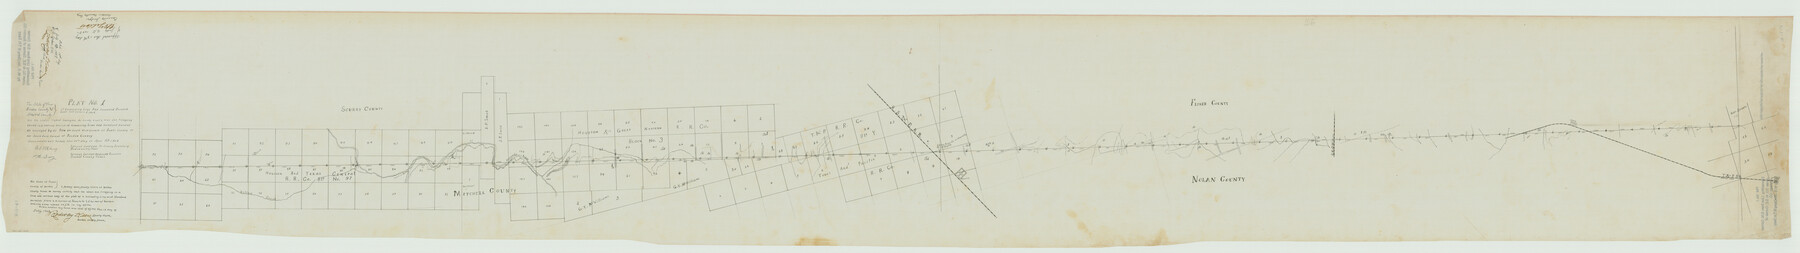 1698, [Plat No. 1, Connecting line from SW corner of Jones Co. to SE corner of Borden Co.], General Map Collection